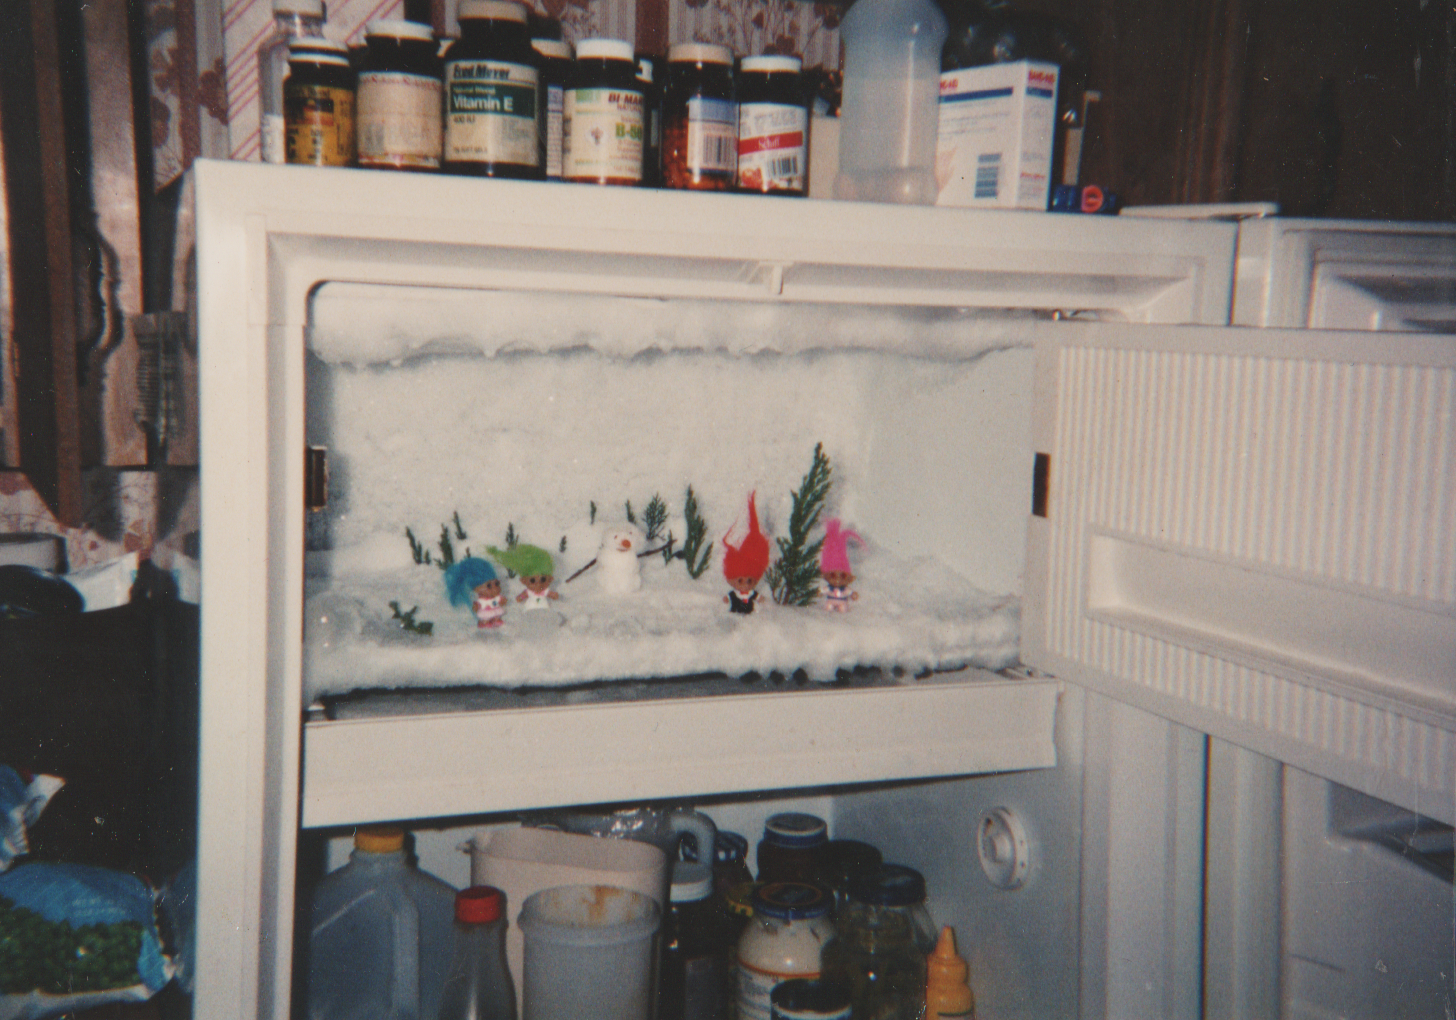 1995 maybe - Trolls in the Freezer 01.png